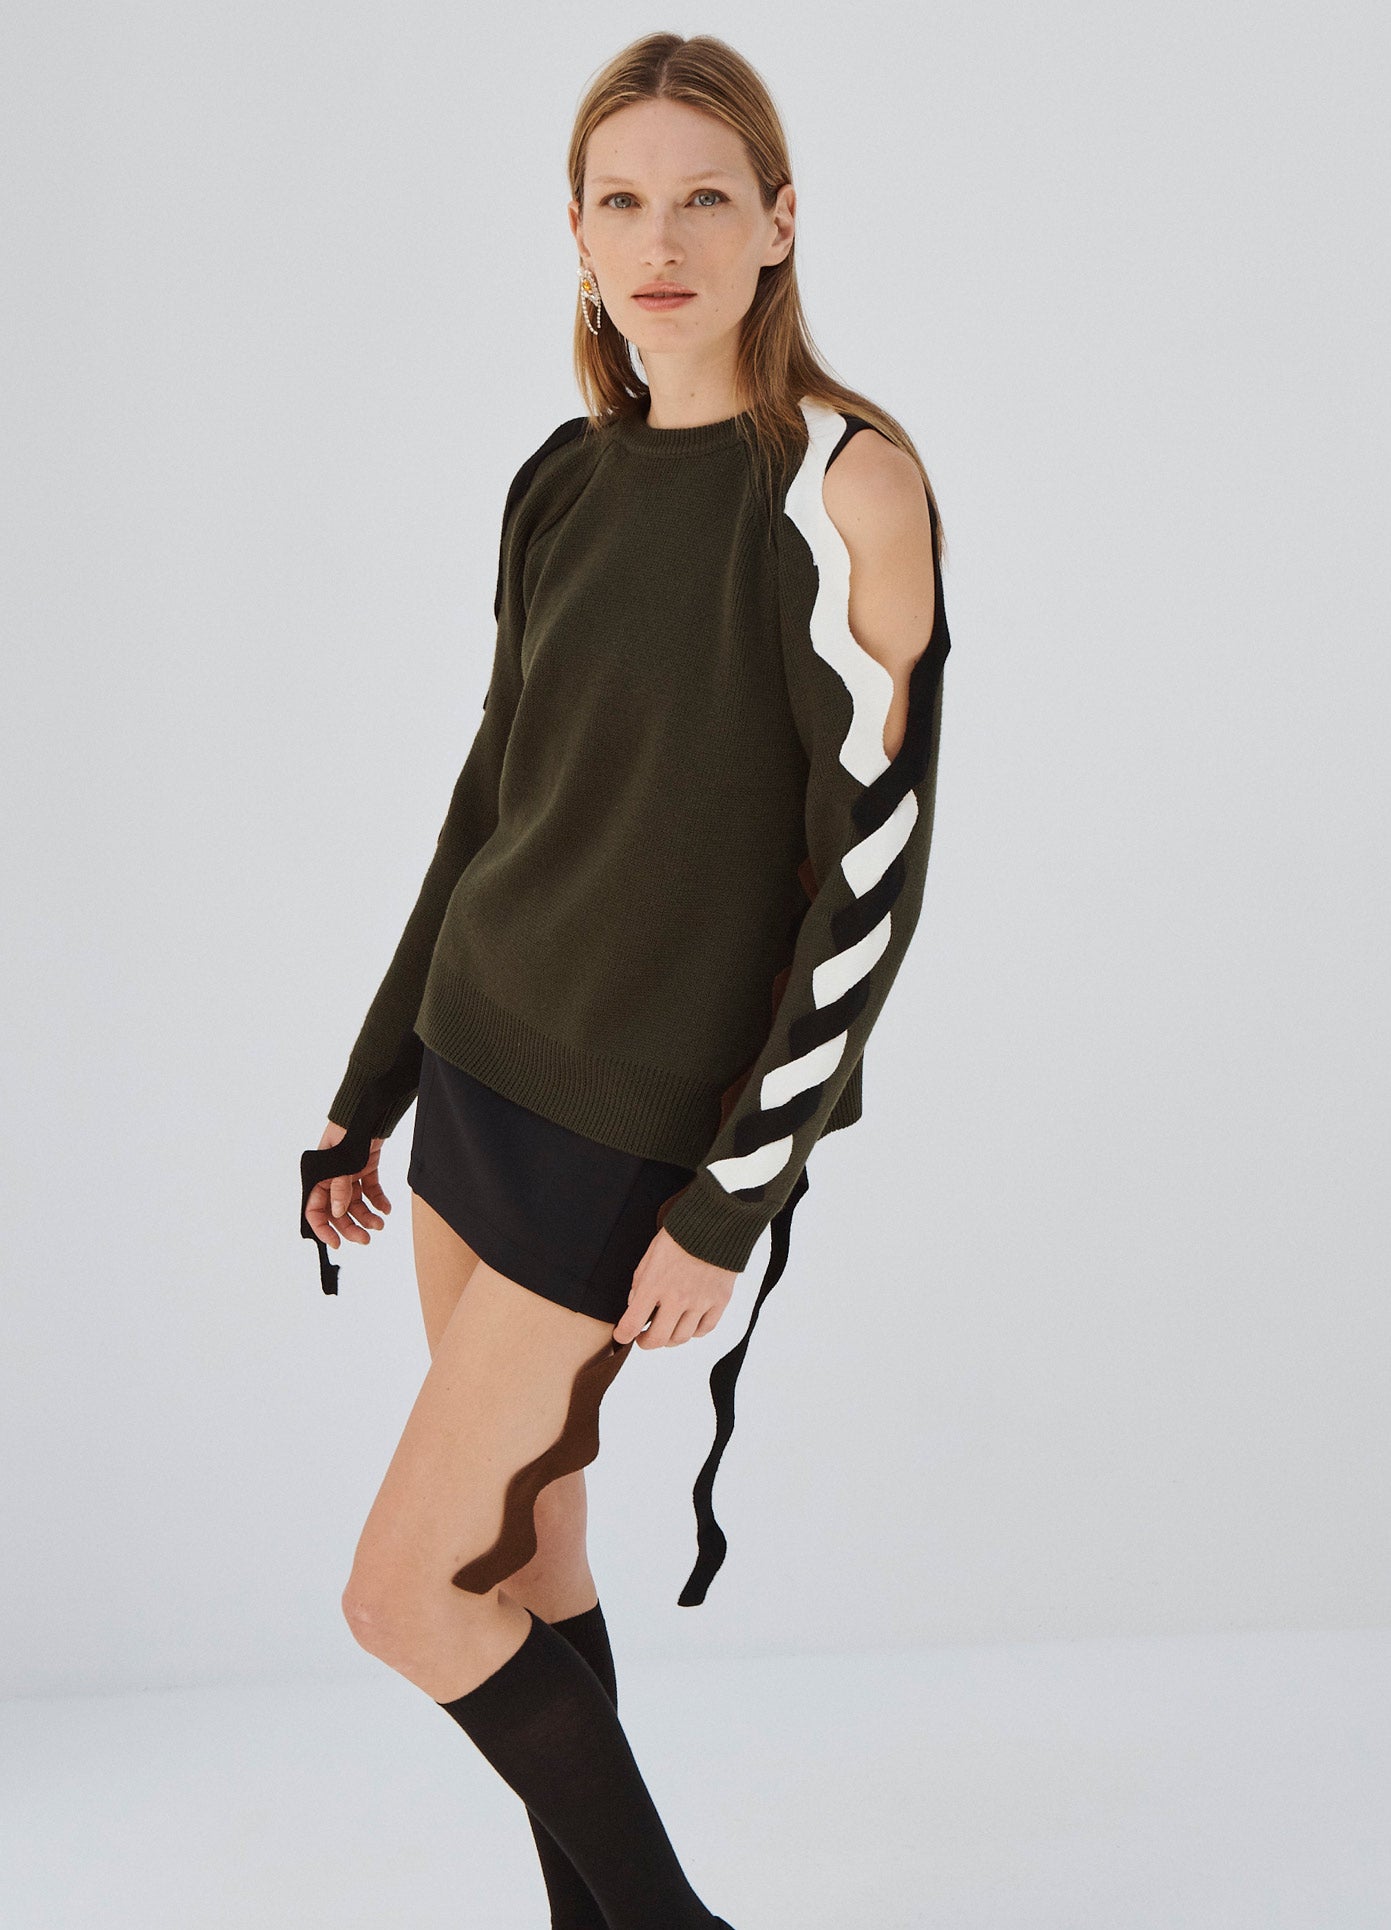 MONSE Ric Rac Sleeve Sweater in Olive on Model Front Aerial View